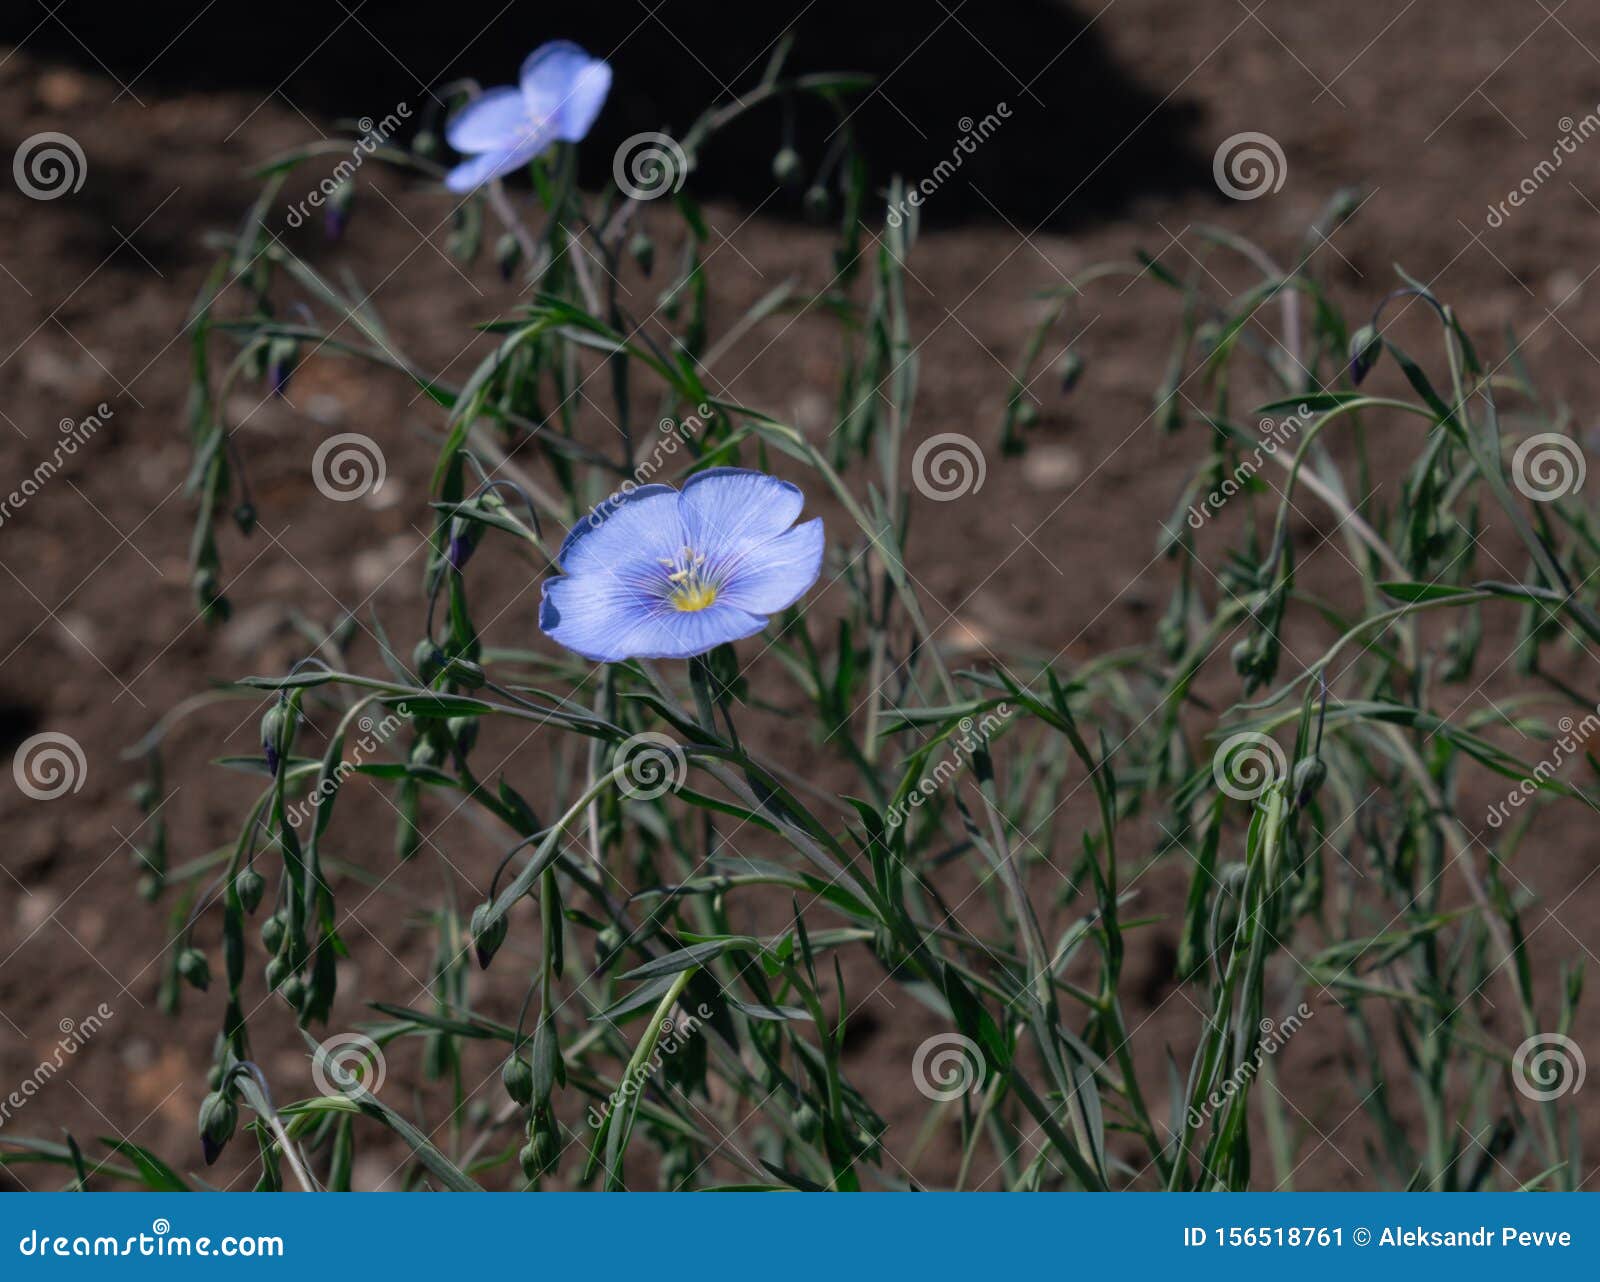 small bush linum perenne with buds and blooming blue flowers